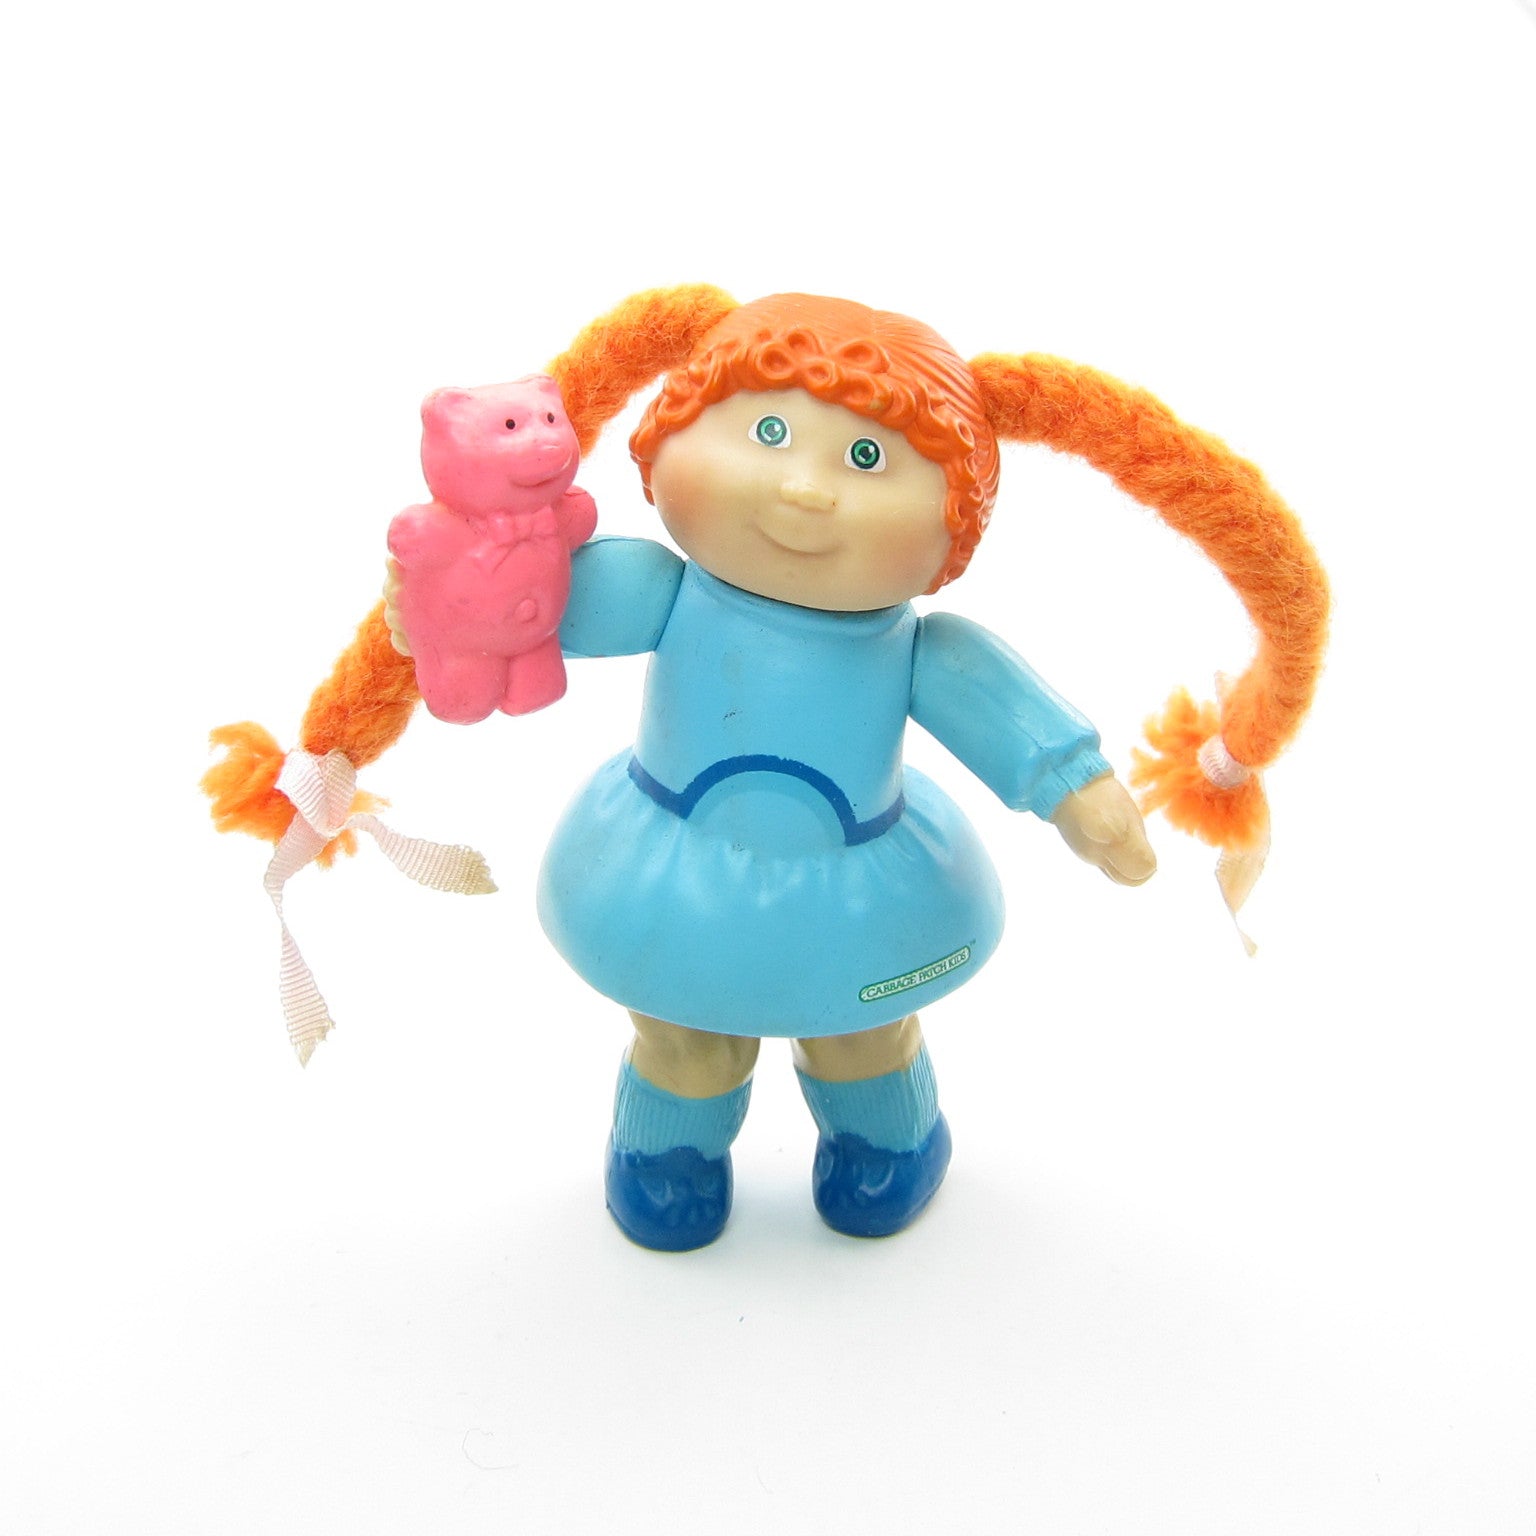 red yarn hair cabbage patch